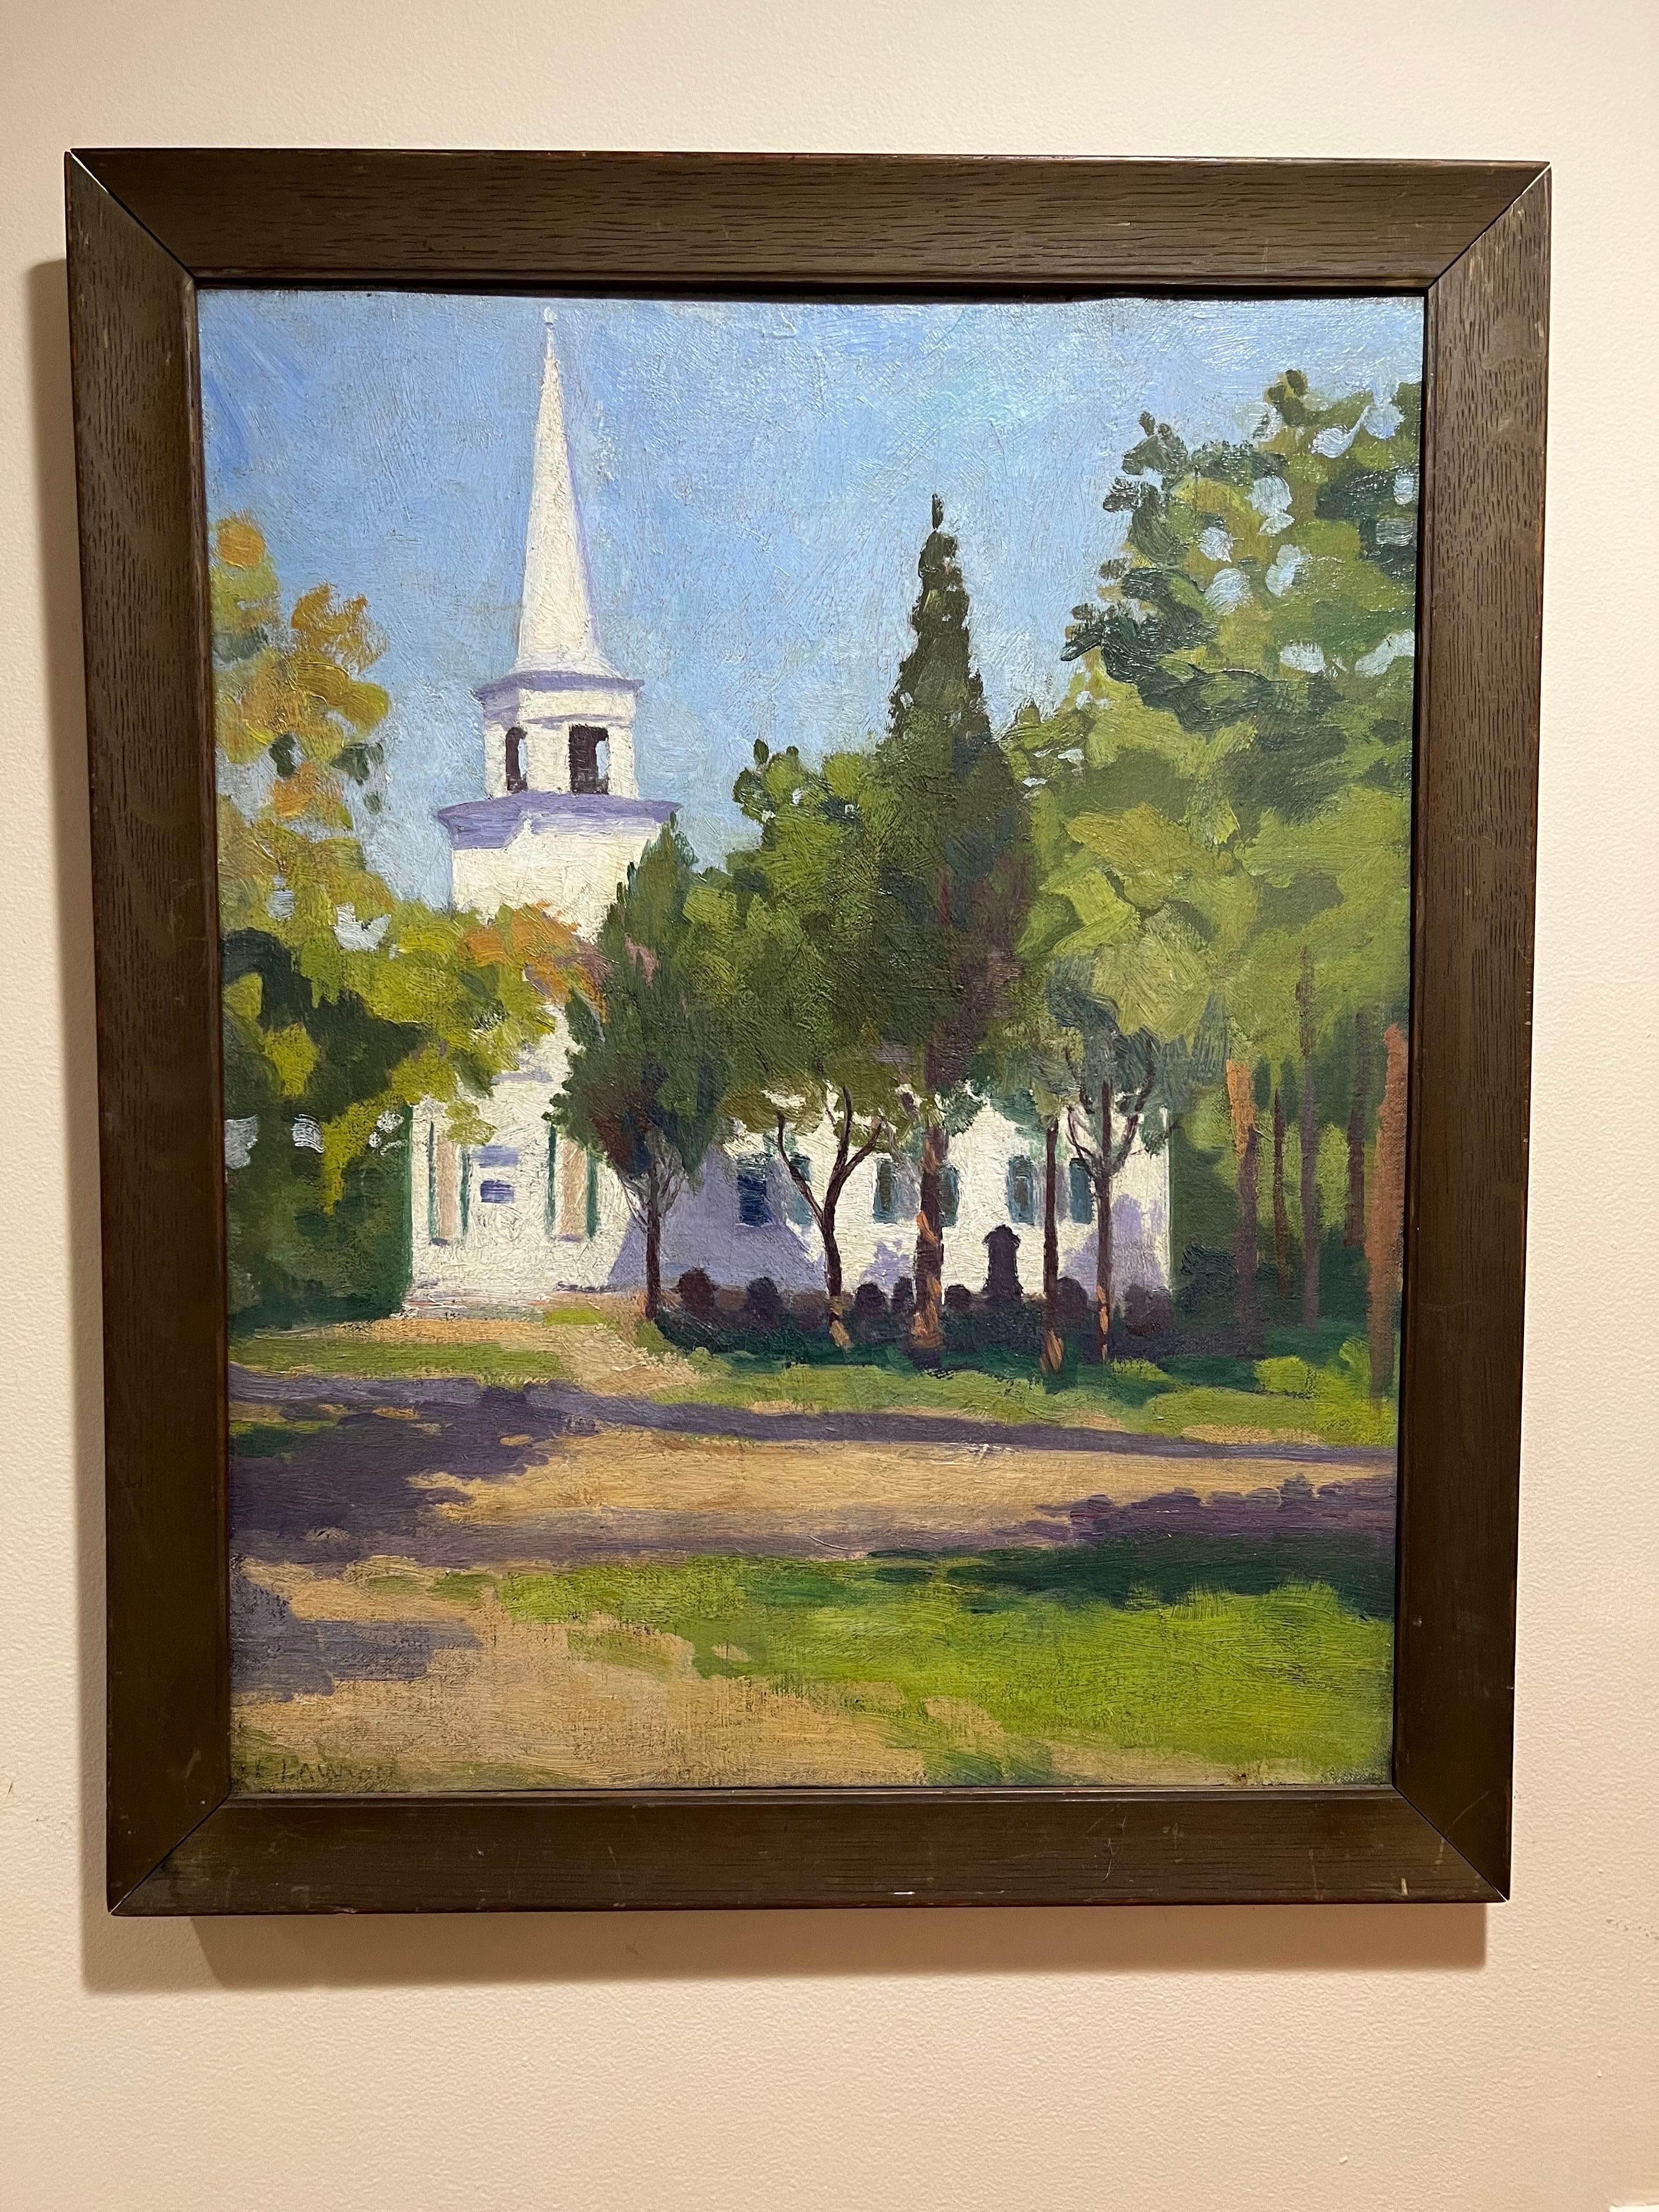 Early 20th century oil on board of a church. Signed but impossible to make out the artists name. Classic clean arts and crafts style painting on board in period solid oak frame. parcel domestic shipping is $29.